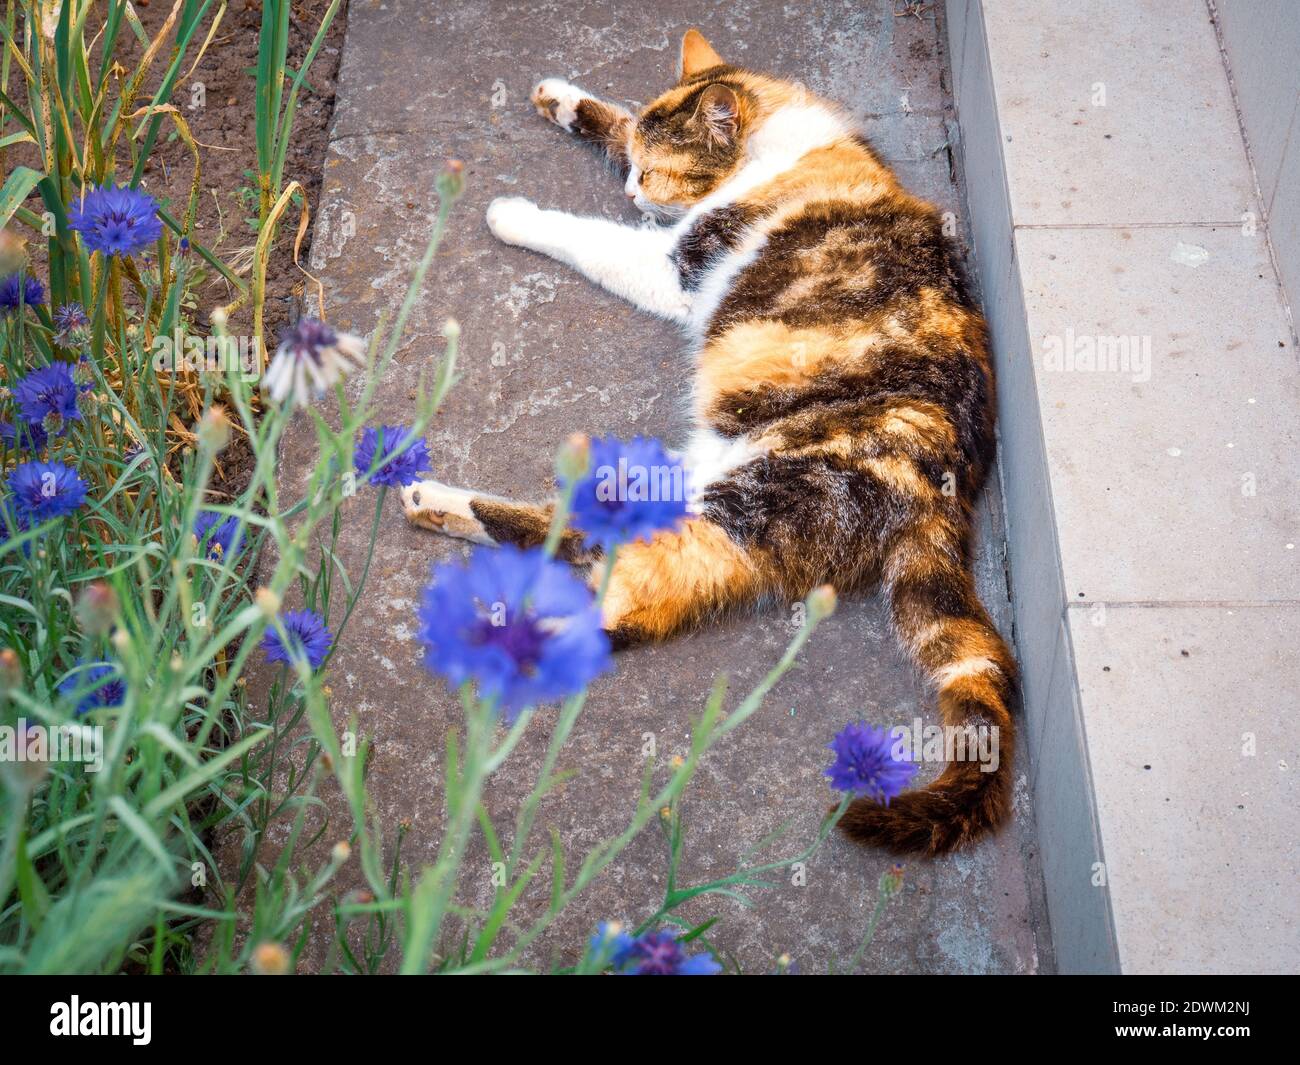 Tricolor calico female cat sleeping outdoors near the country house with blurry violet cornflowers blooming in the foreground. Stock Photo